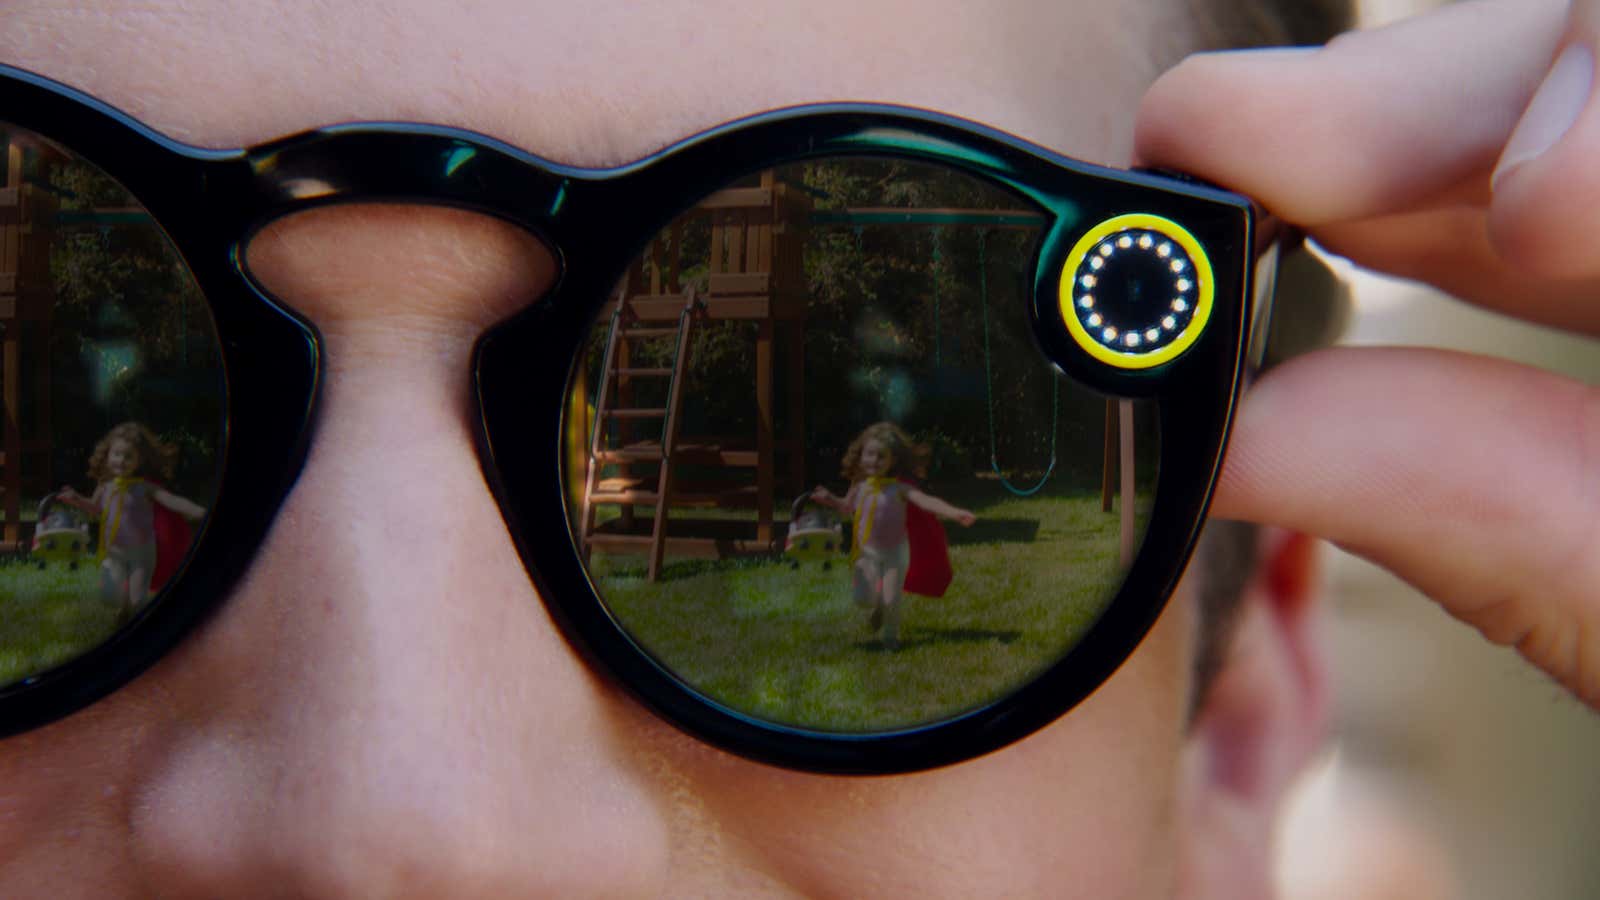 Up next for Apple—something like Snap’s Spectacles?